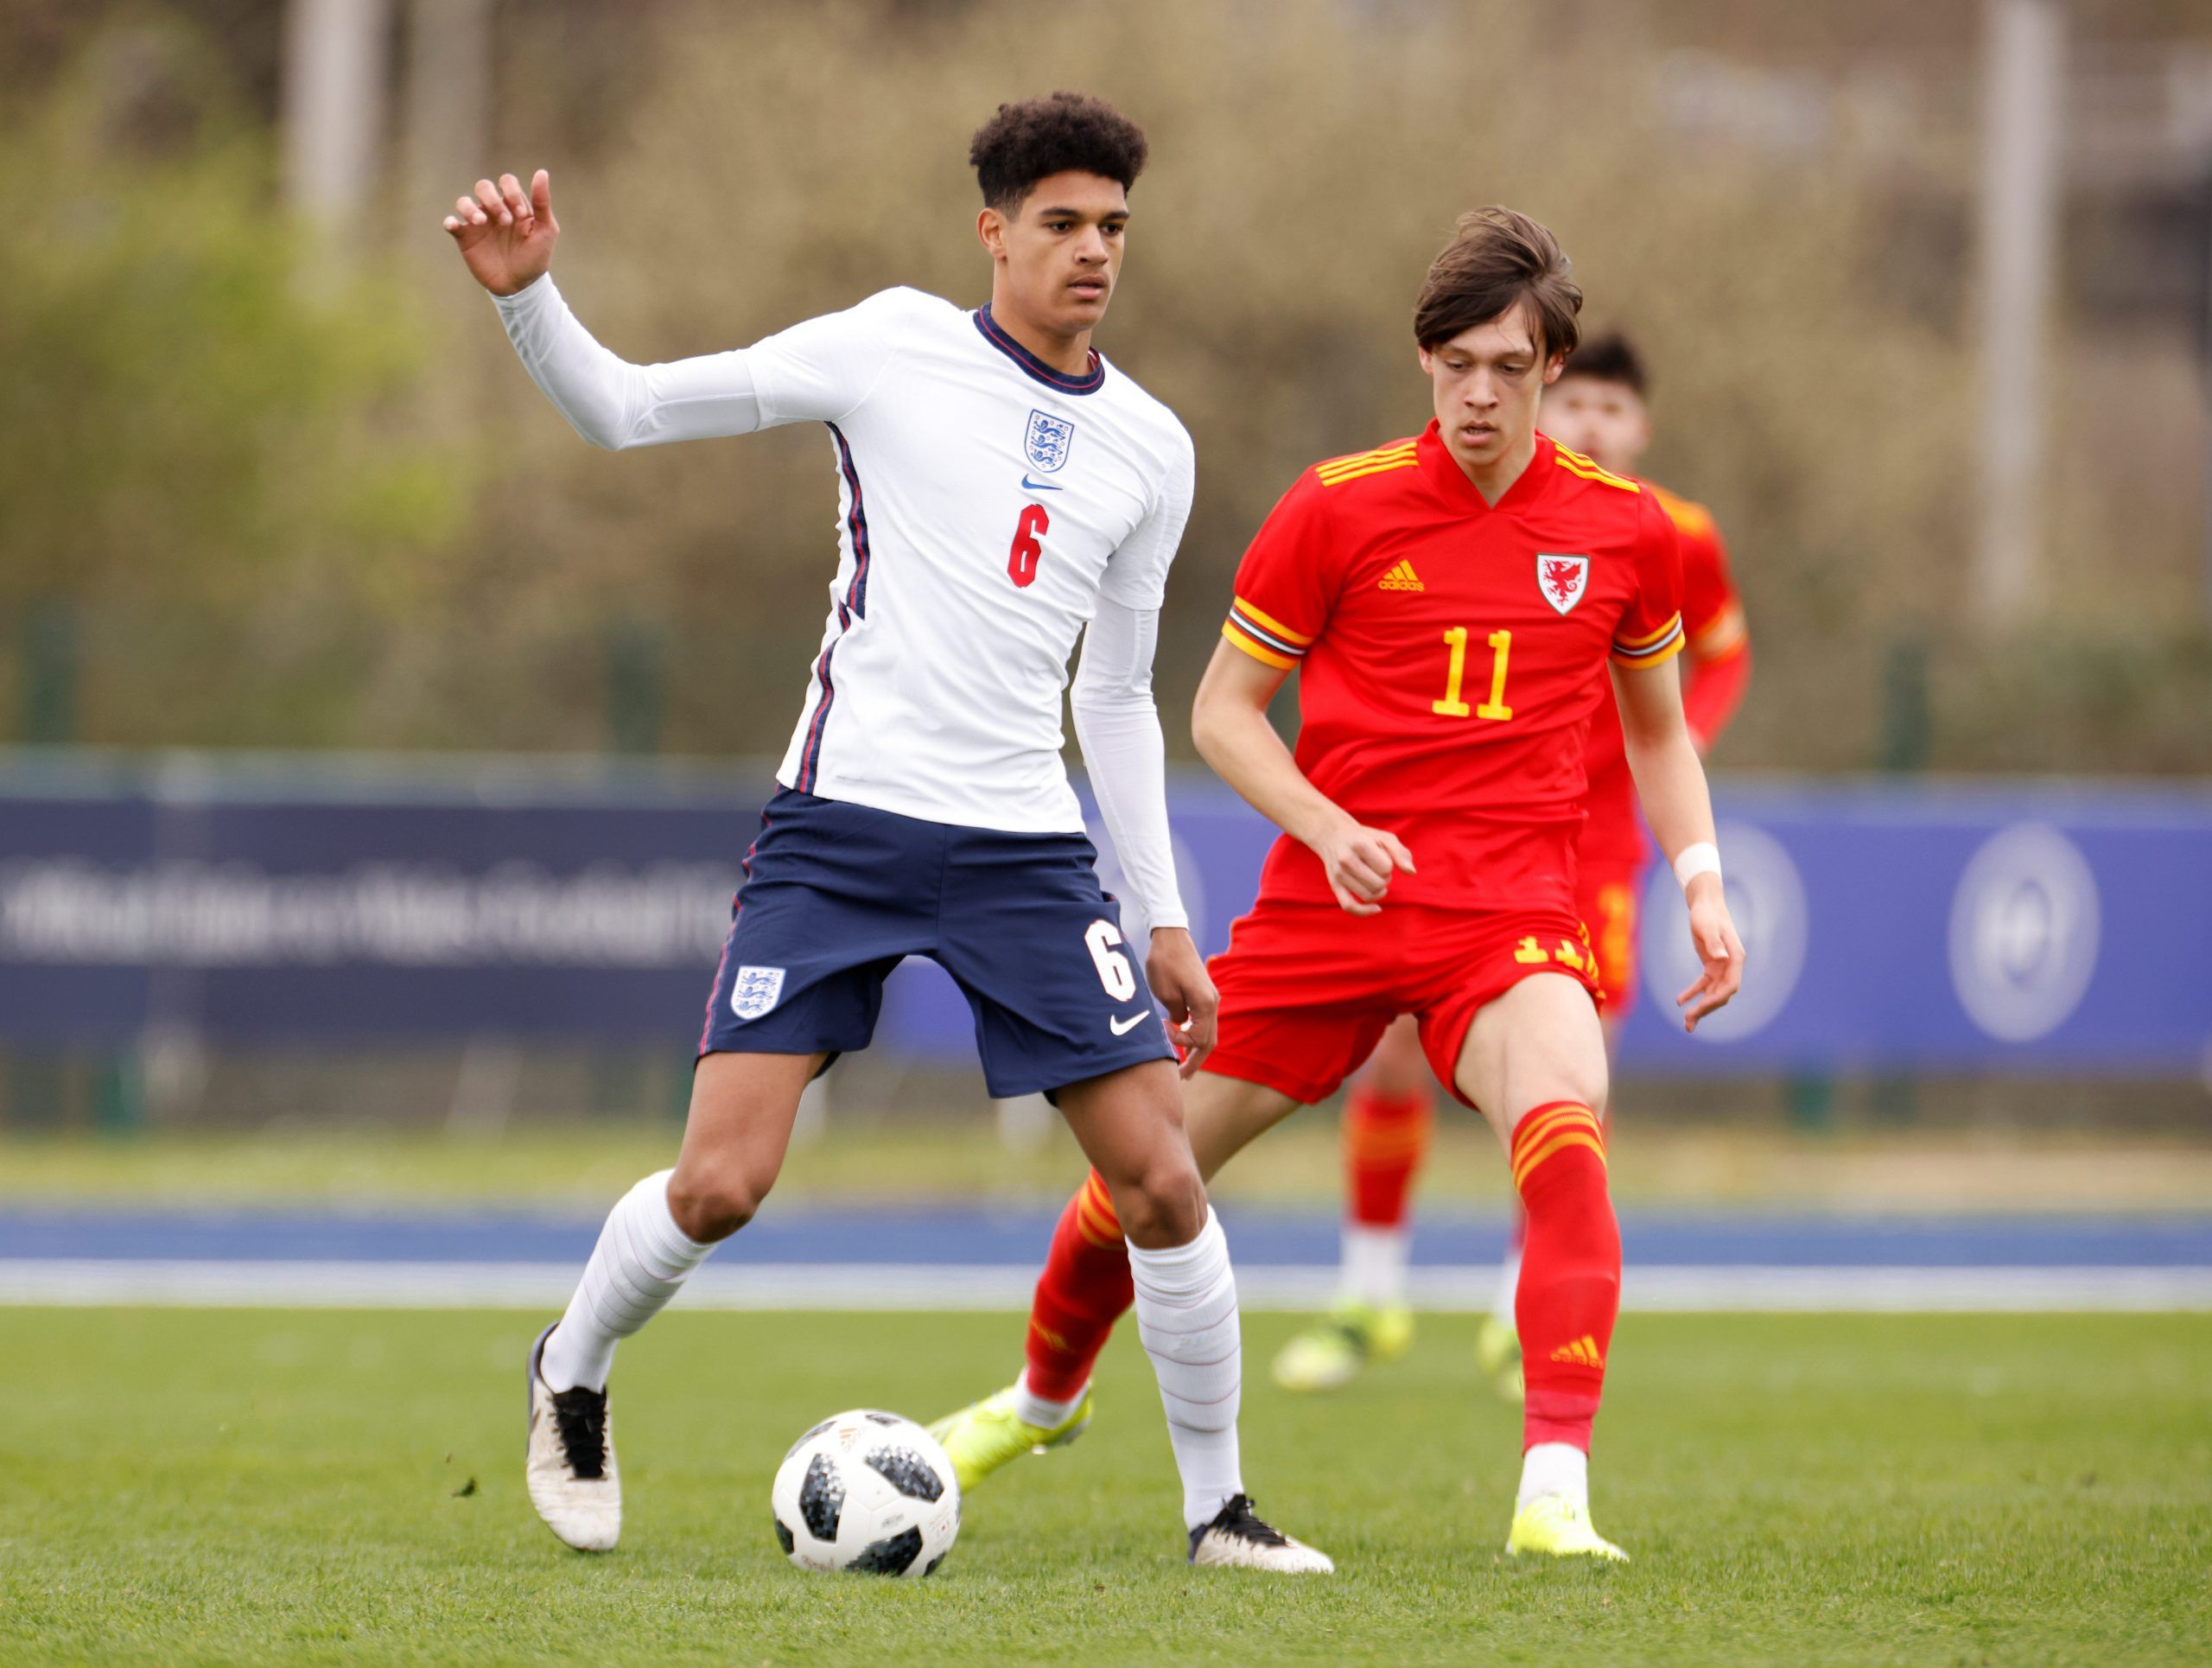 Soccer Football - Under 18 International Friendly - Wales v England - Cardiff International Sports Campus, Cardiff, Wales, Britain - March 29, 2021 England under 18's Jarell Quansah in action with Wales under 18's Chris Popov  Action Images/John Sibley